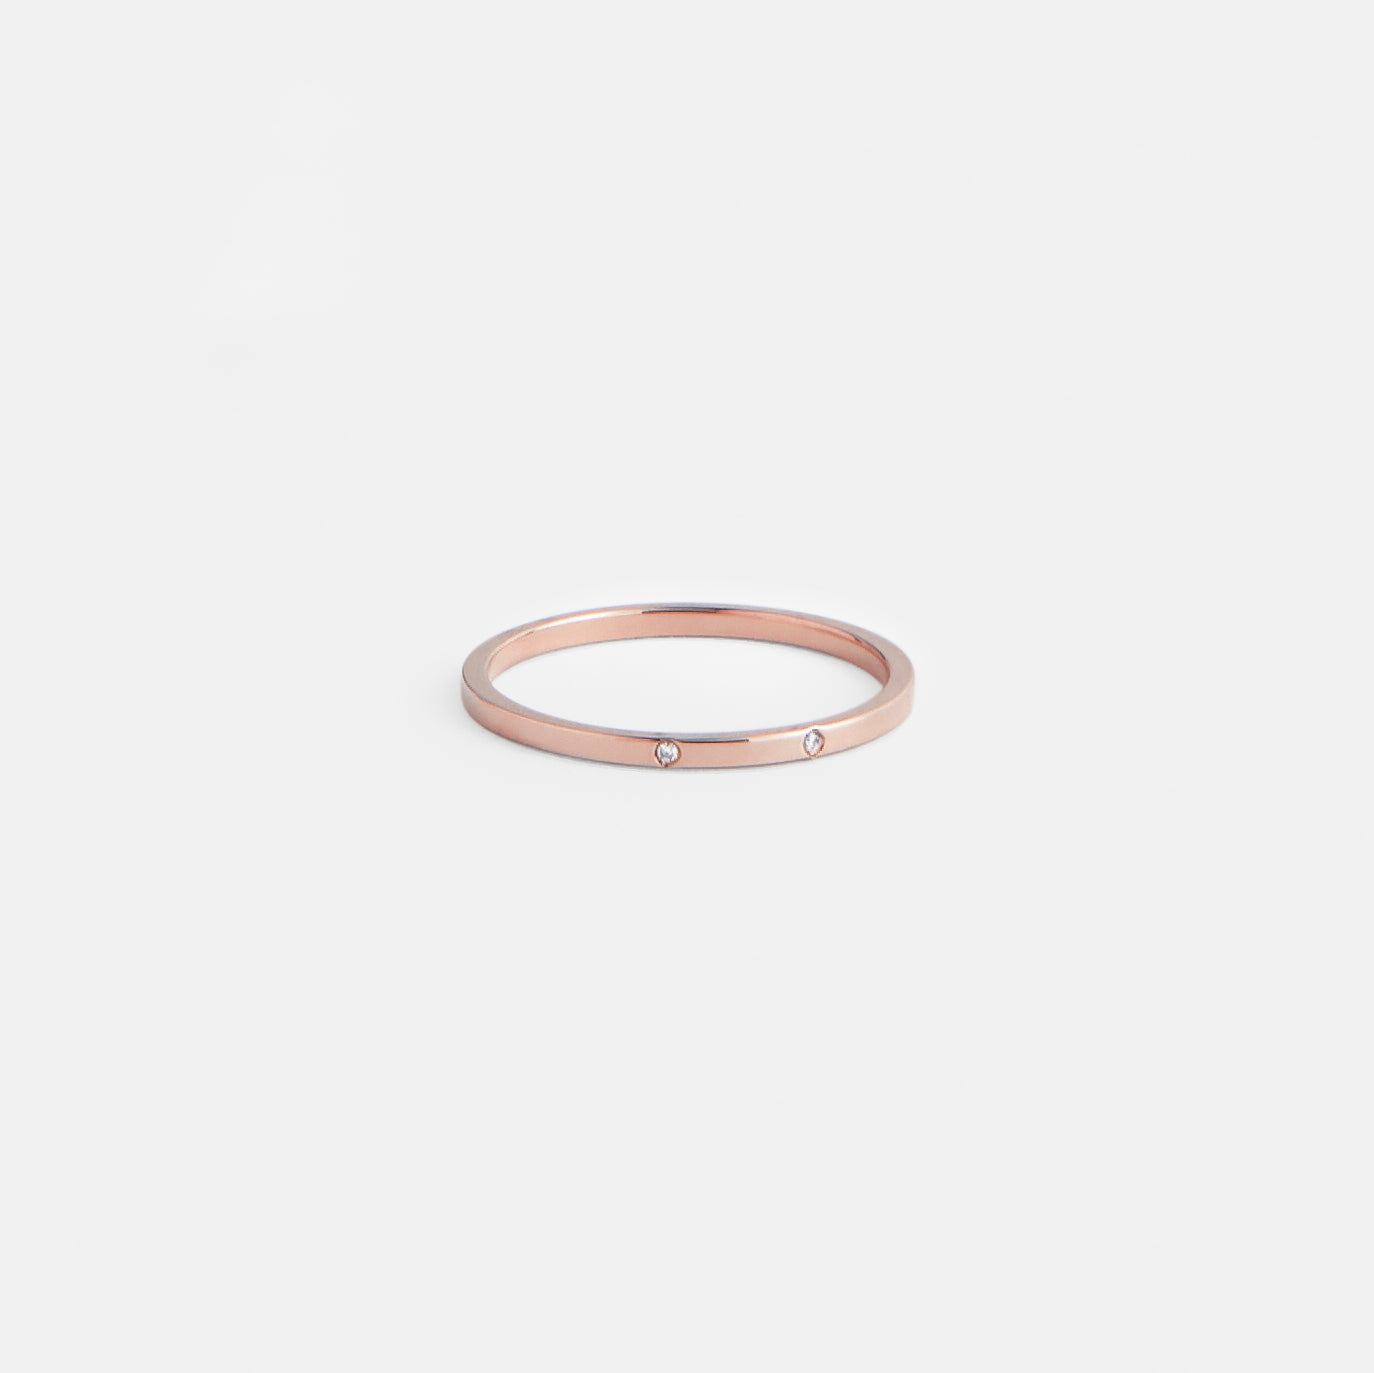 Sarala Cool Ring in 14k Rose Gold set with White Diamonds By SHW Fine Jewelry New York City